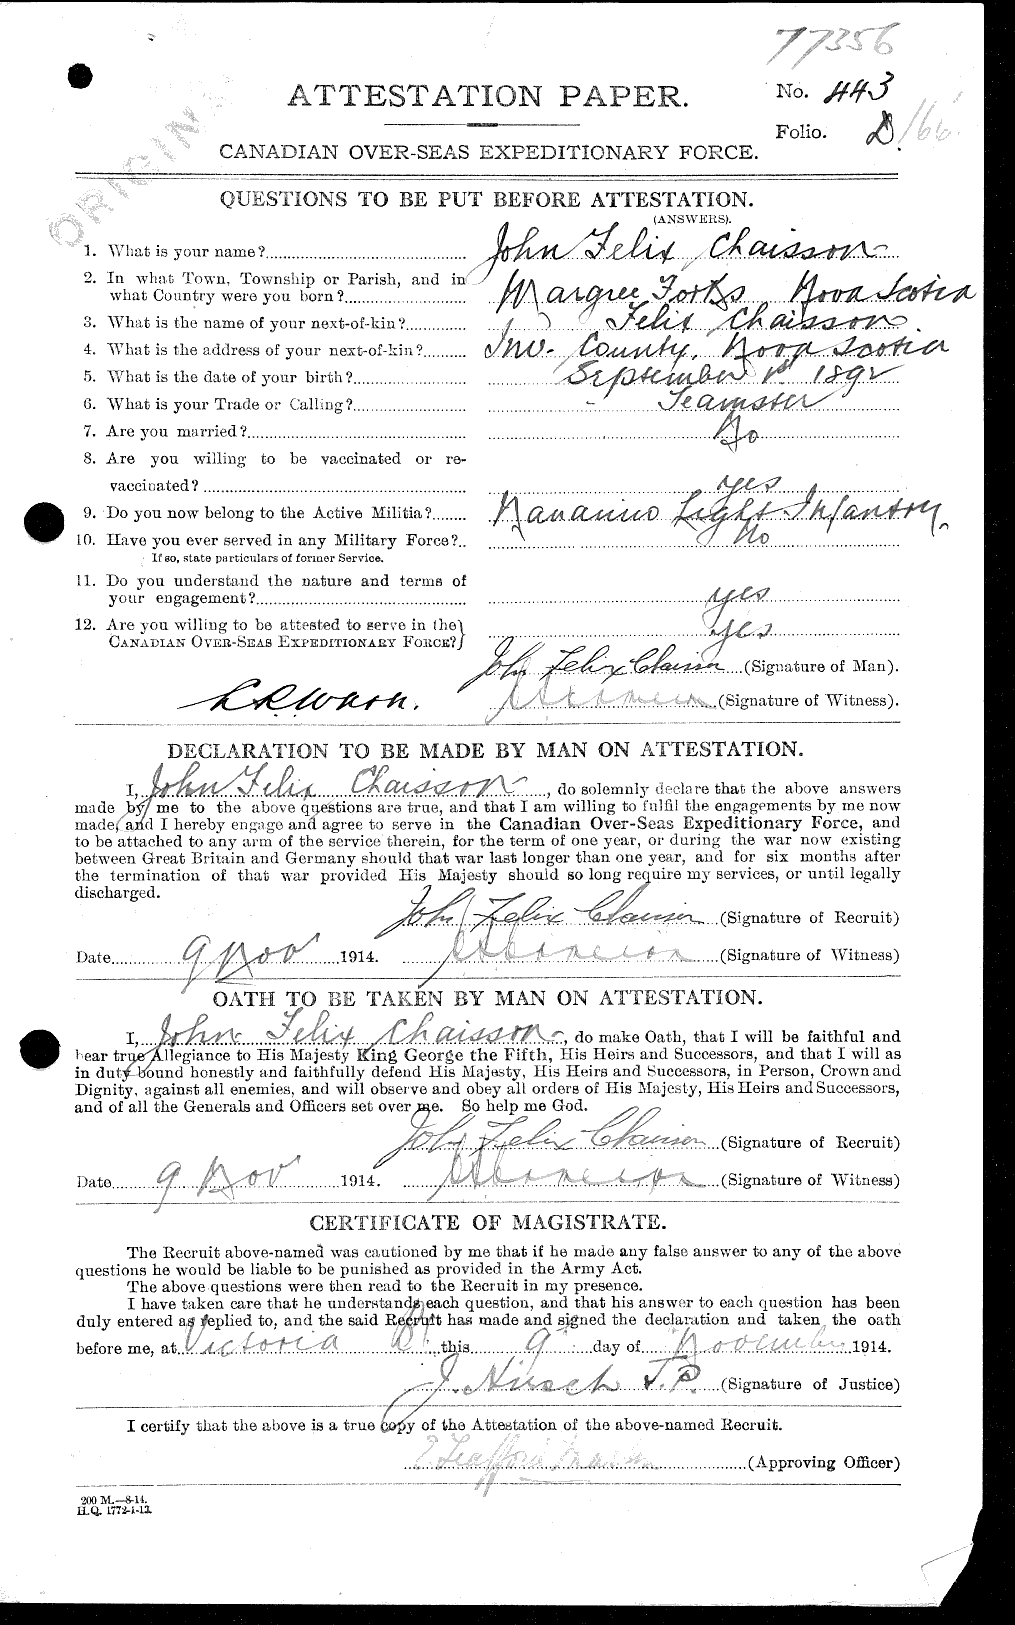 Personnel Records of the First World War - CEF 012312a